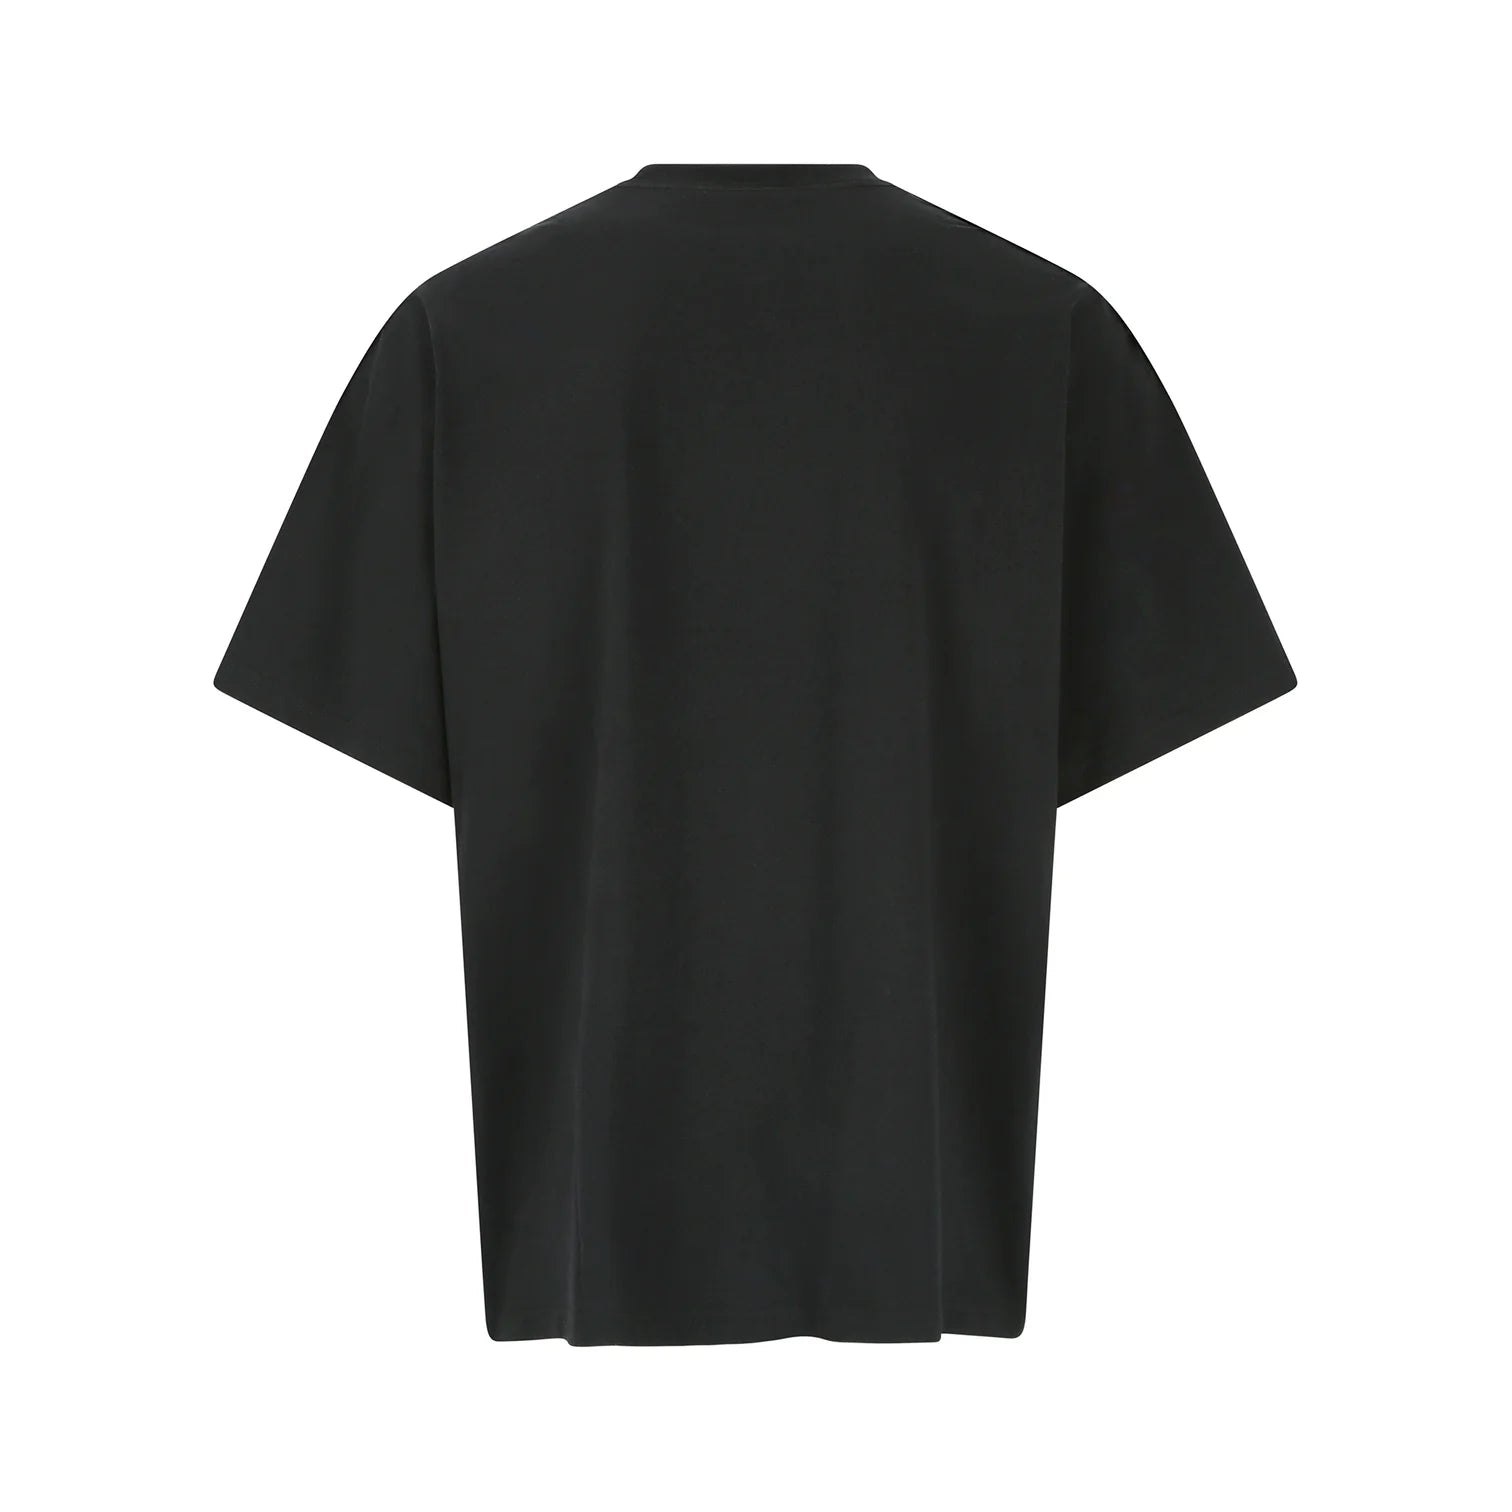 MARTINE ROSE - Oversized S/S T-Shirt - (Black/Curtly) view 2